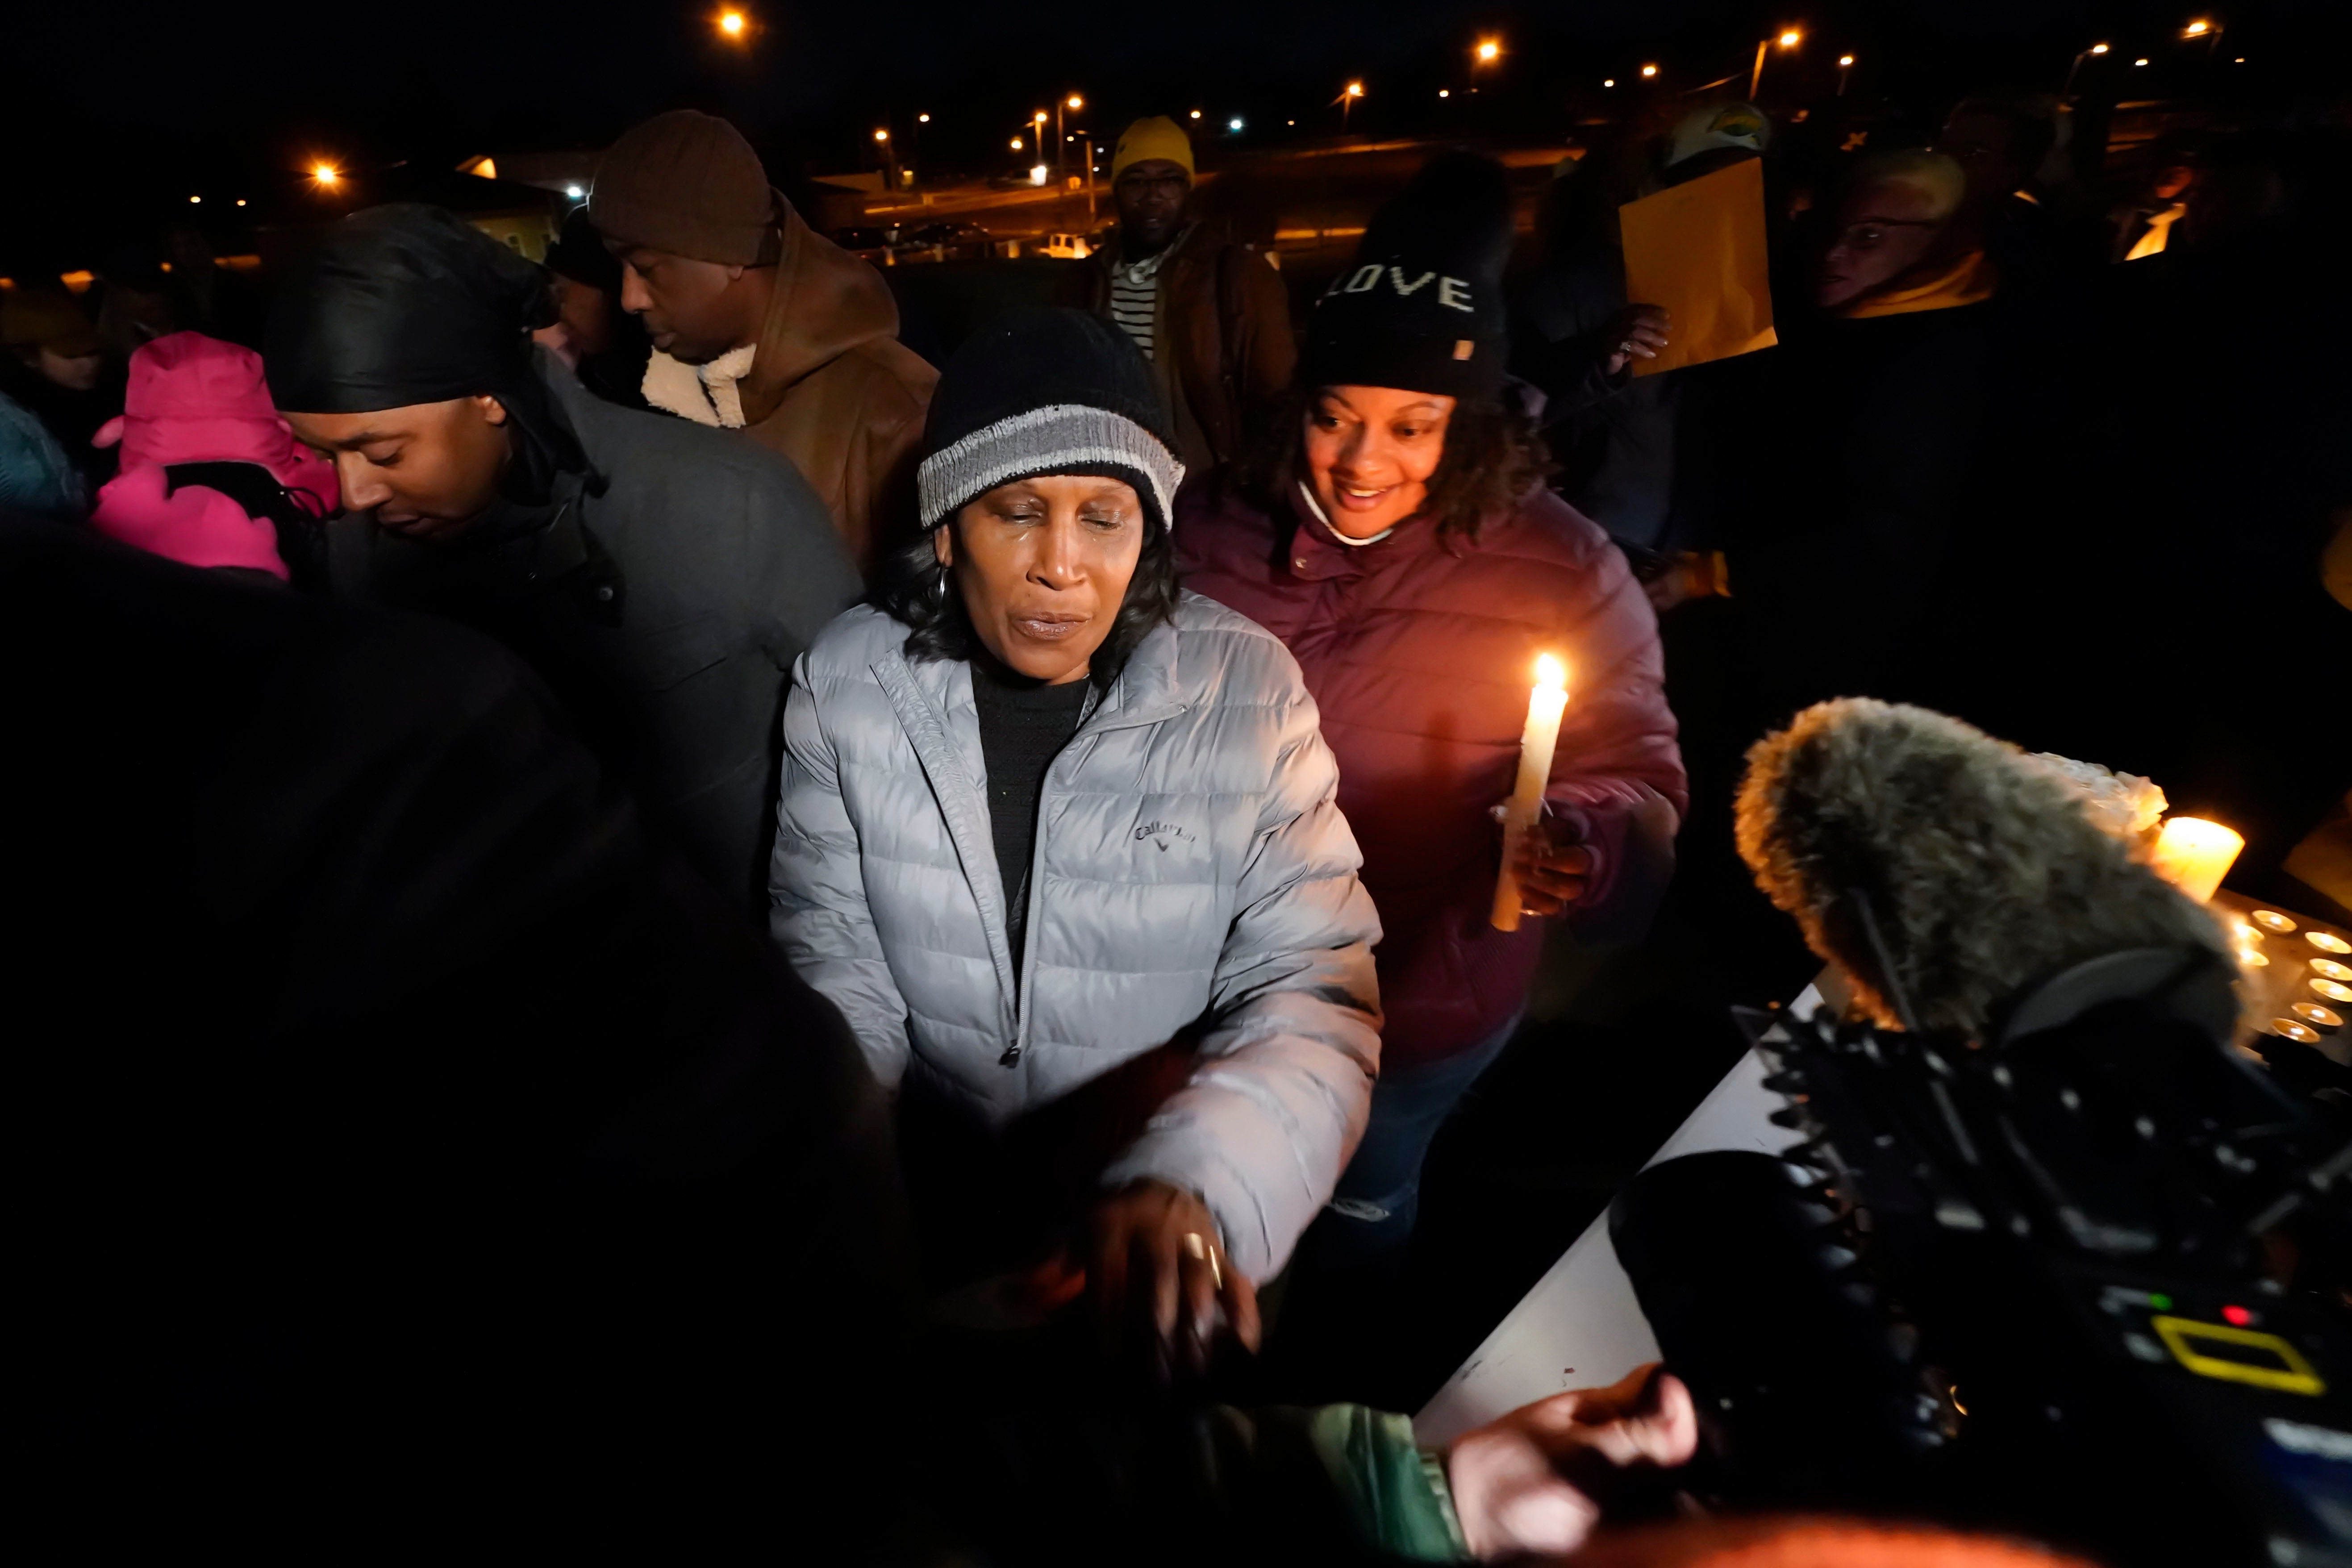 Tyre Nichols’ mother RowVaughn Wells attends a vigil in Memphis on Thursday